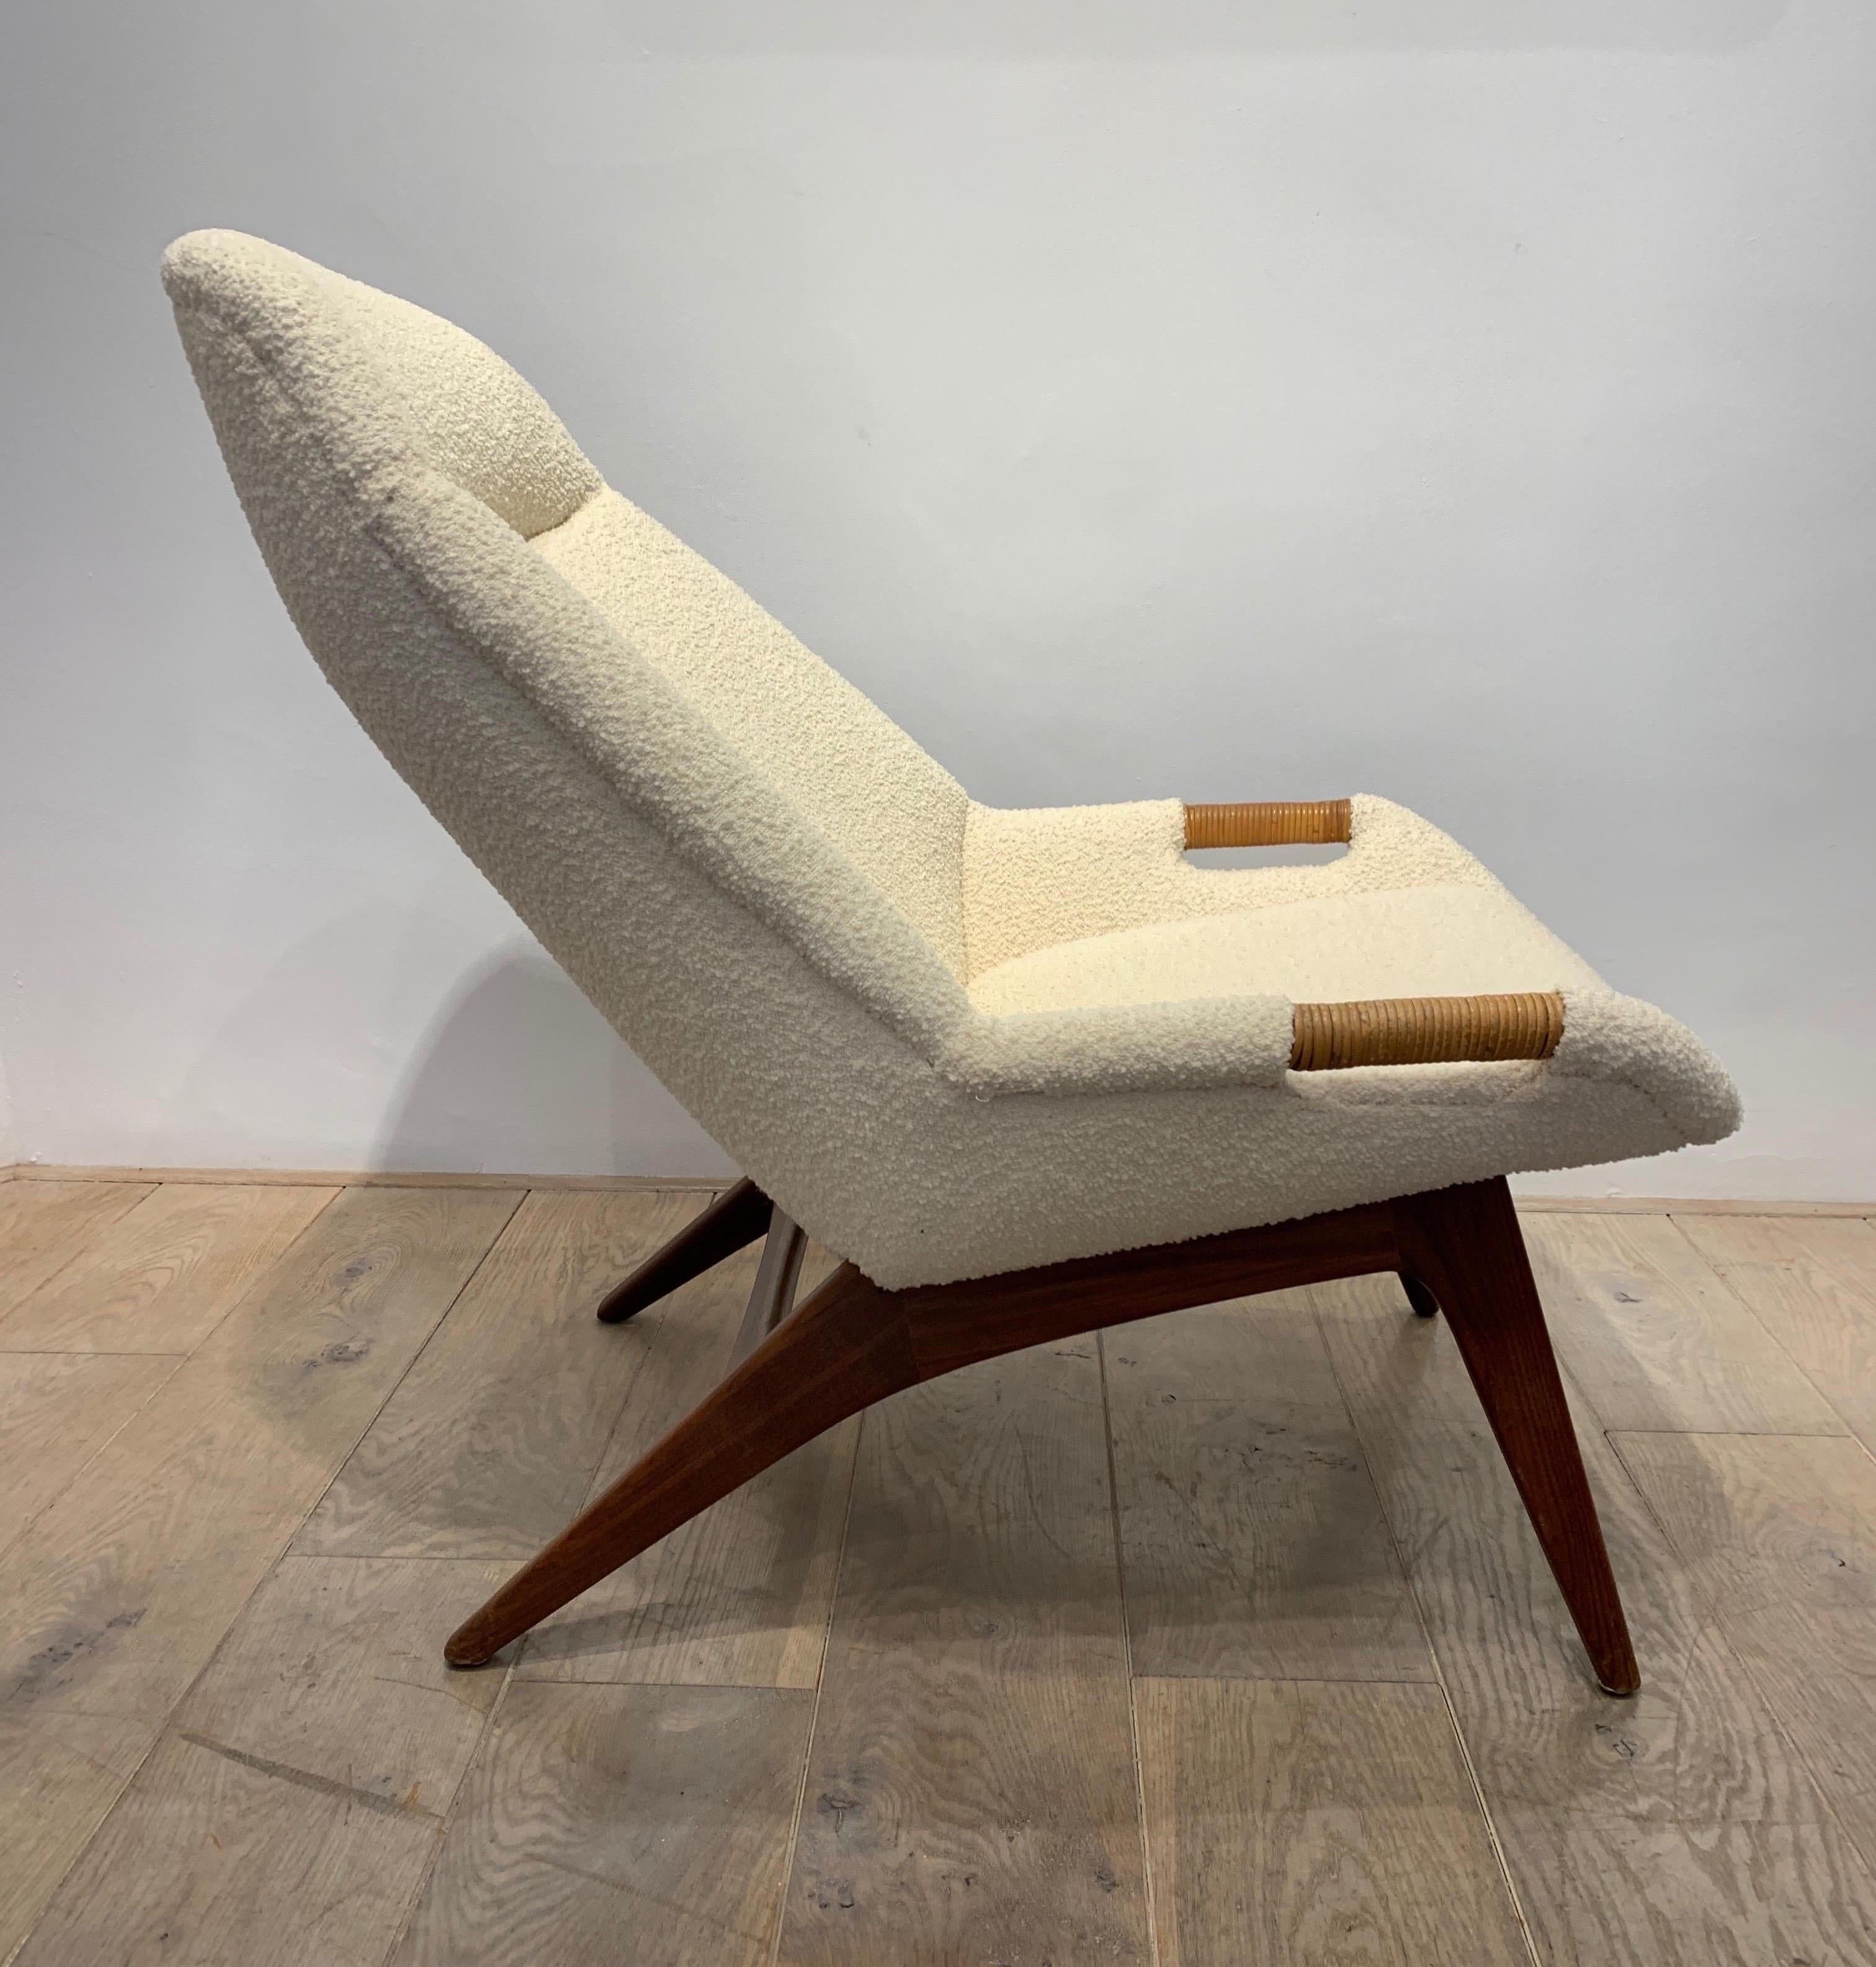 Arnt Lande is Norwegian designer who specialised in seat designing in the mid twentieth century period. The easy chair is reupholstered with Bisson Bruneel Bergamo fabric, which creates the effect of “laine bouclette”. The arms are covered with